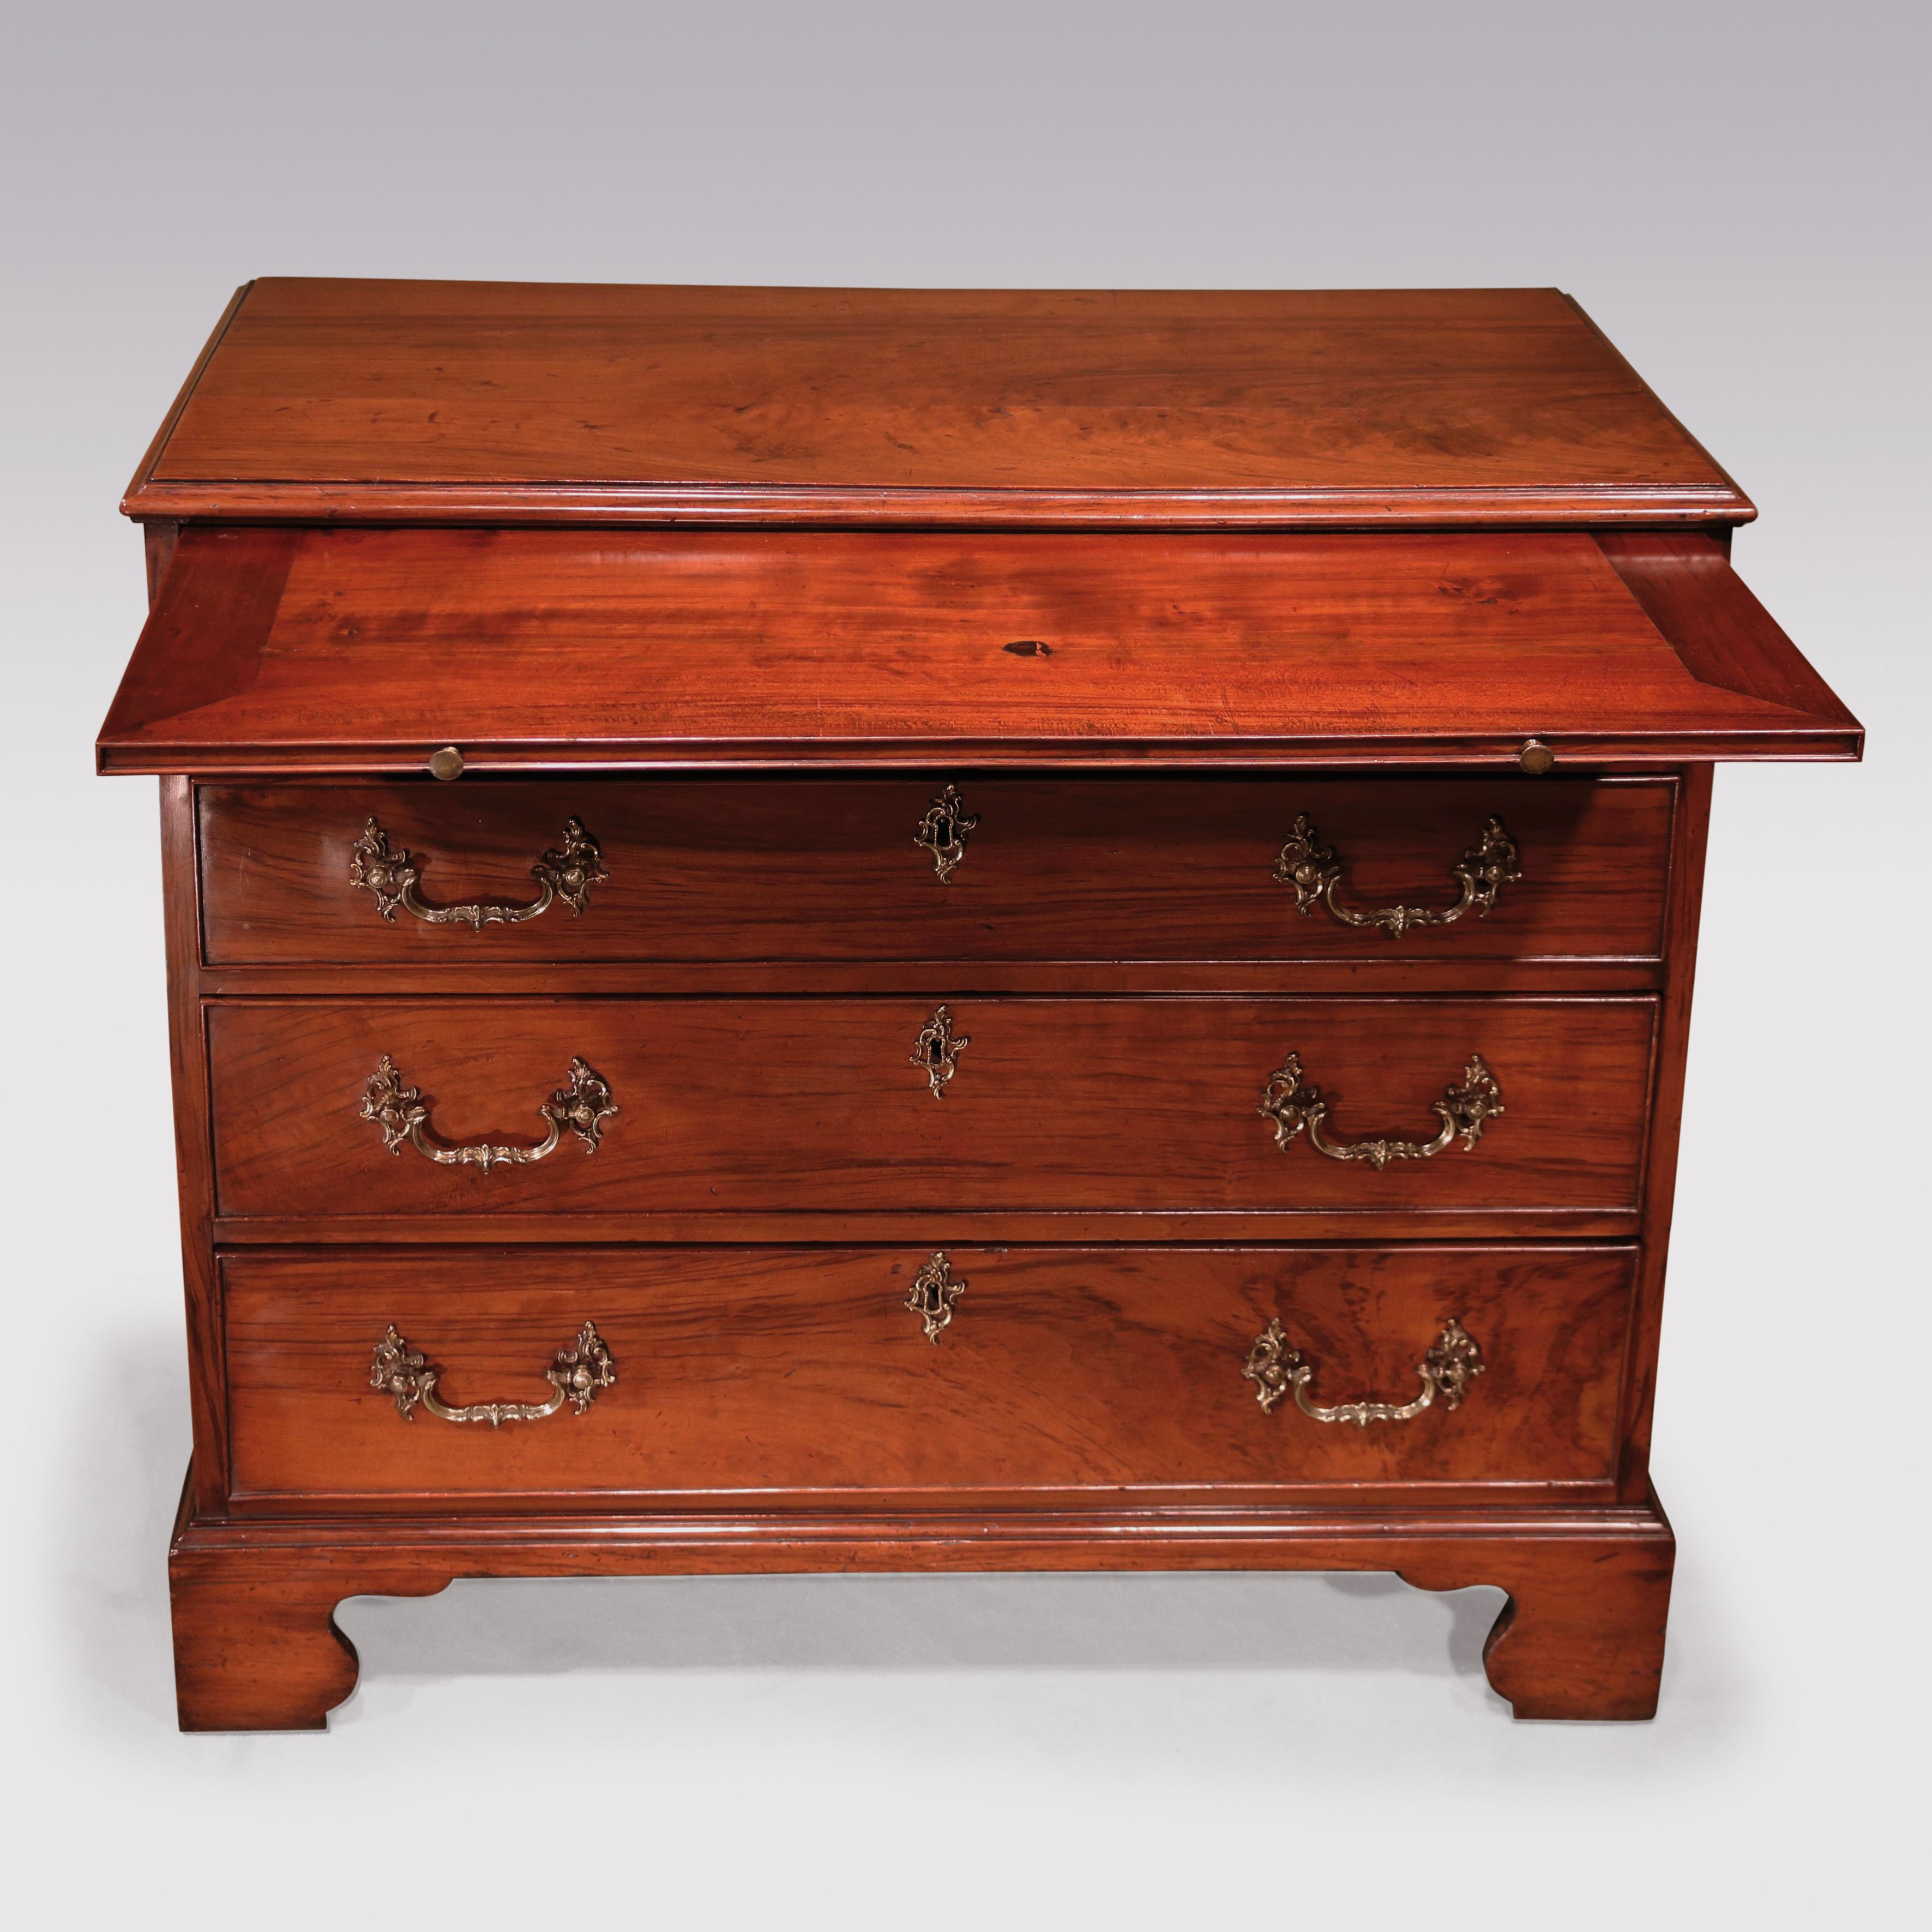 English Mid 18th Century Chippendale Period Padouk Wood Chest of Drawers For Sale